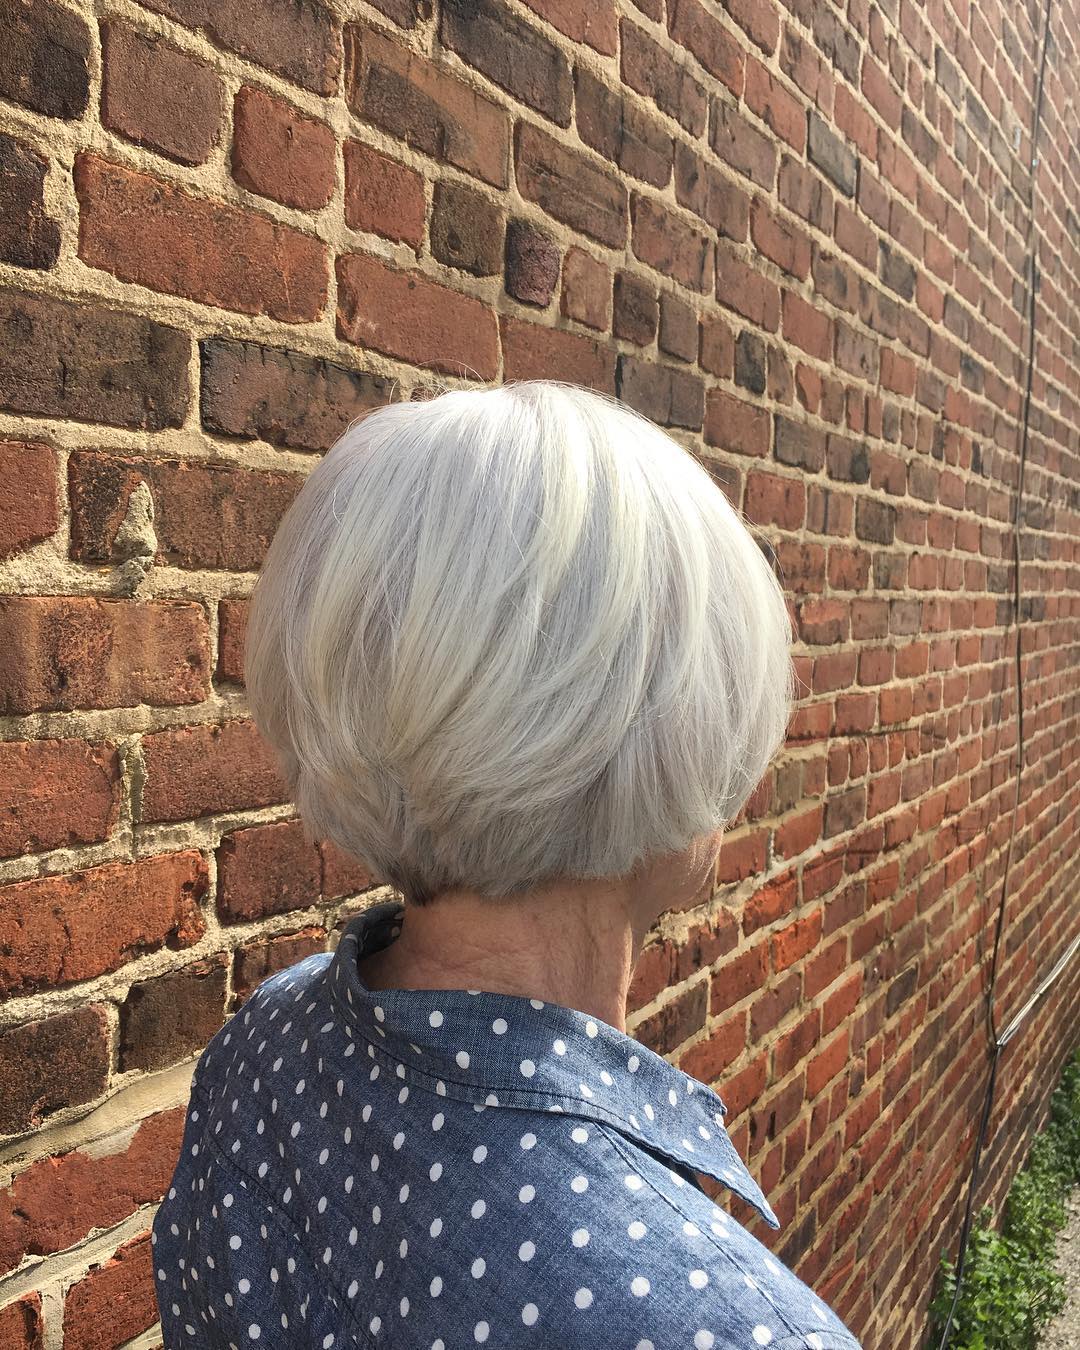 22 Best Haircuts &#038; Hairstyles for Women Over 50 With Thick Hair